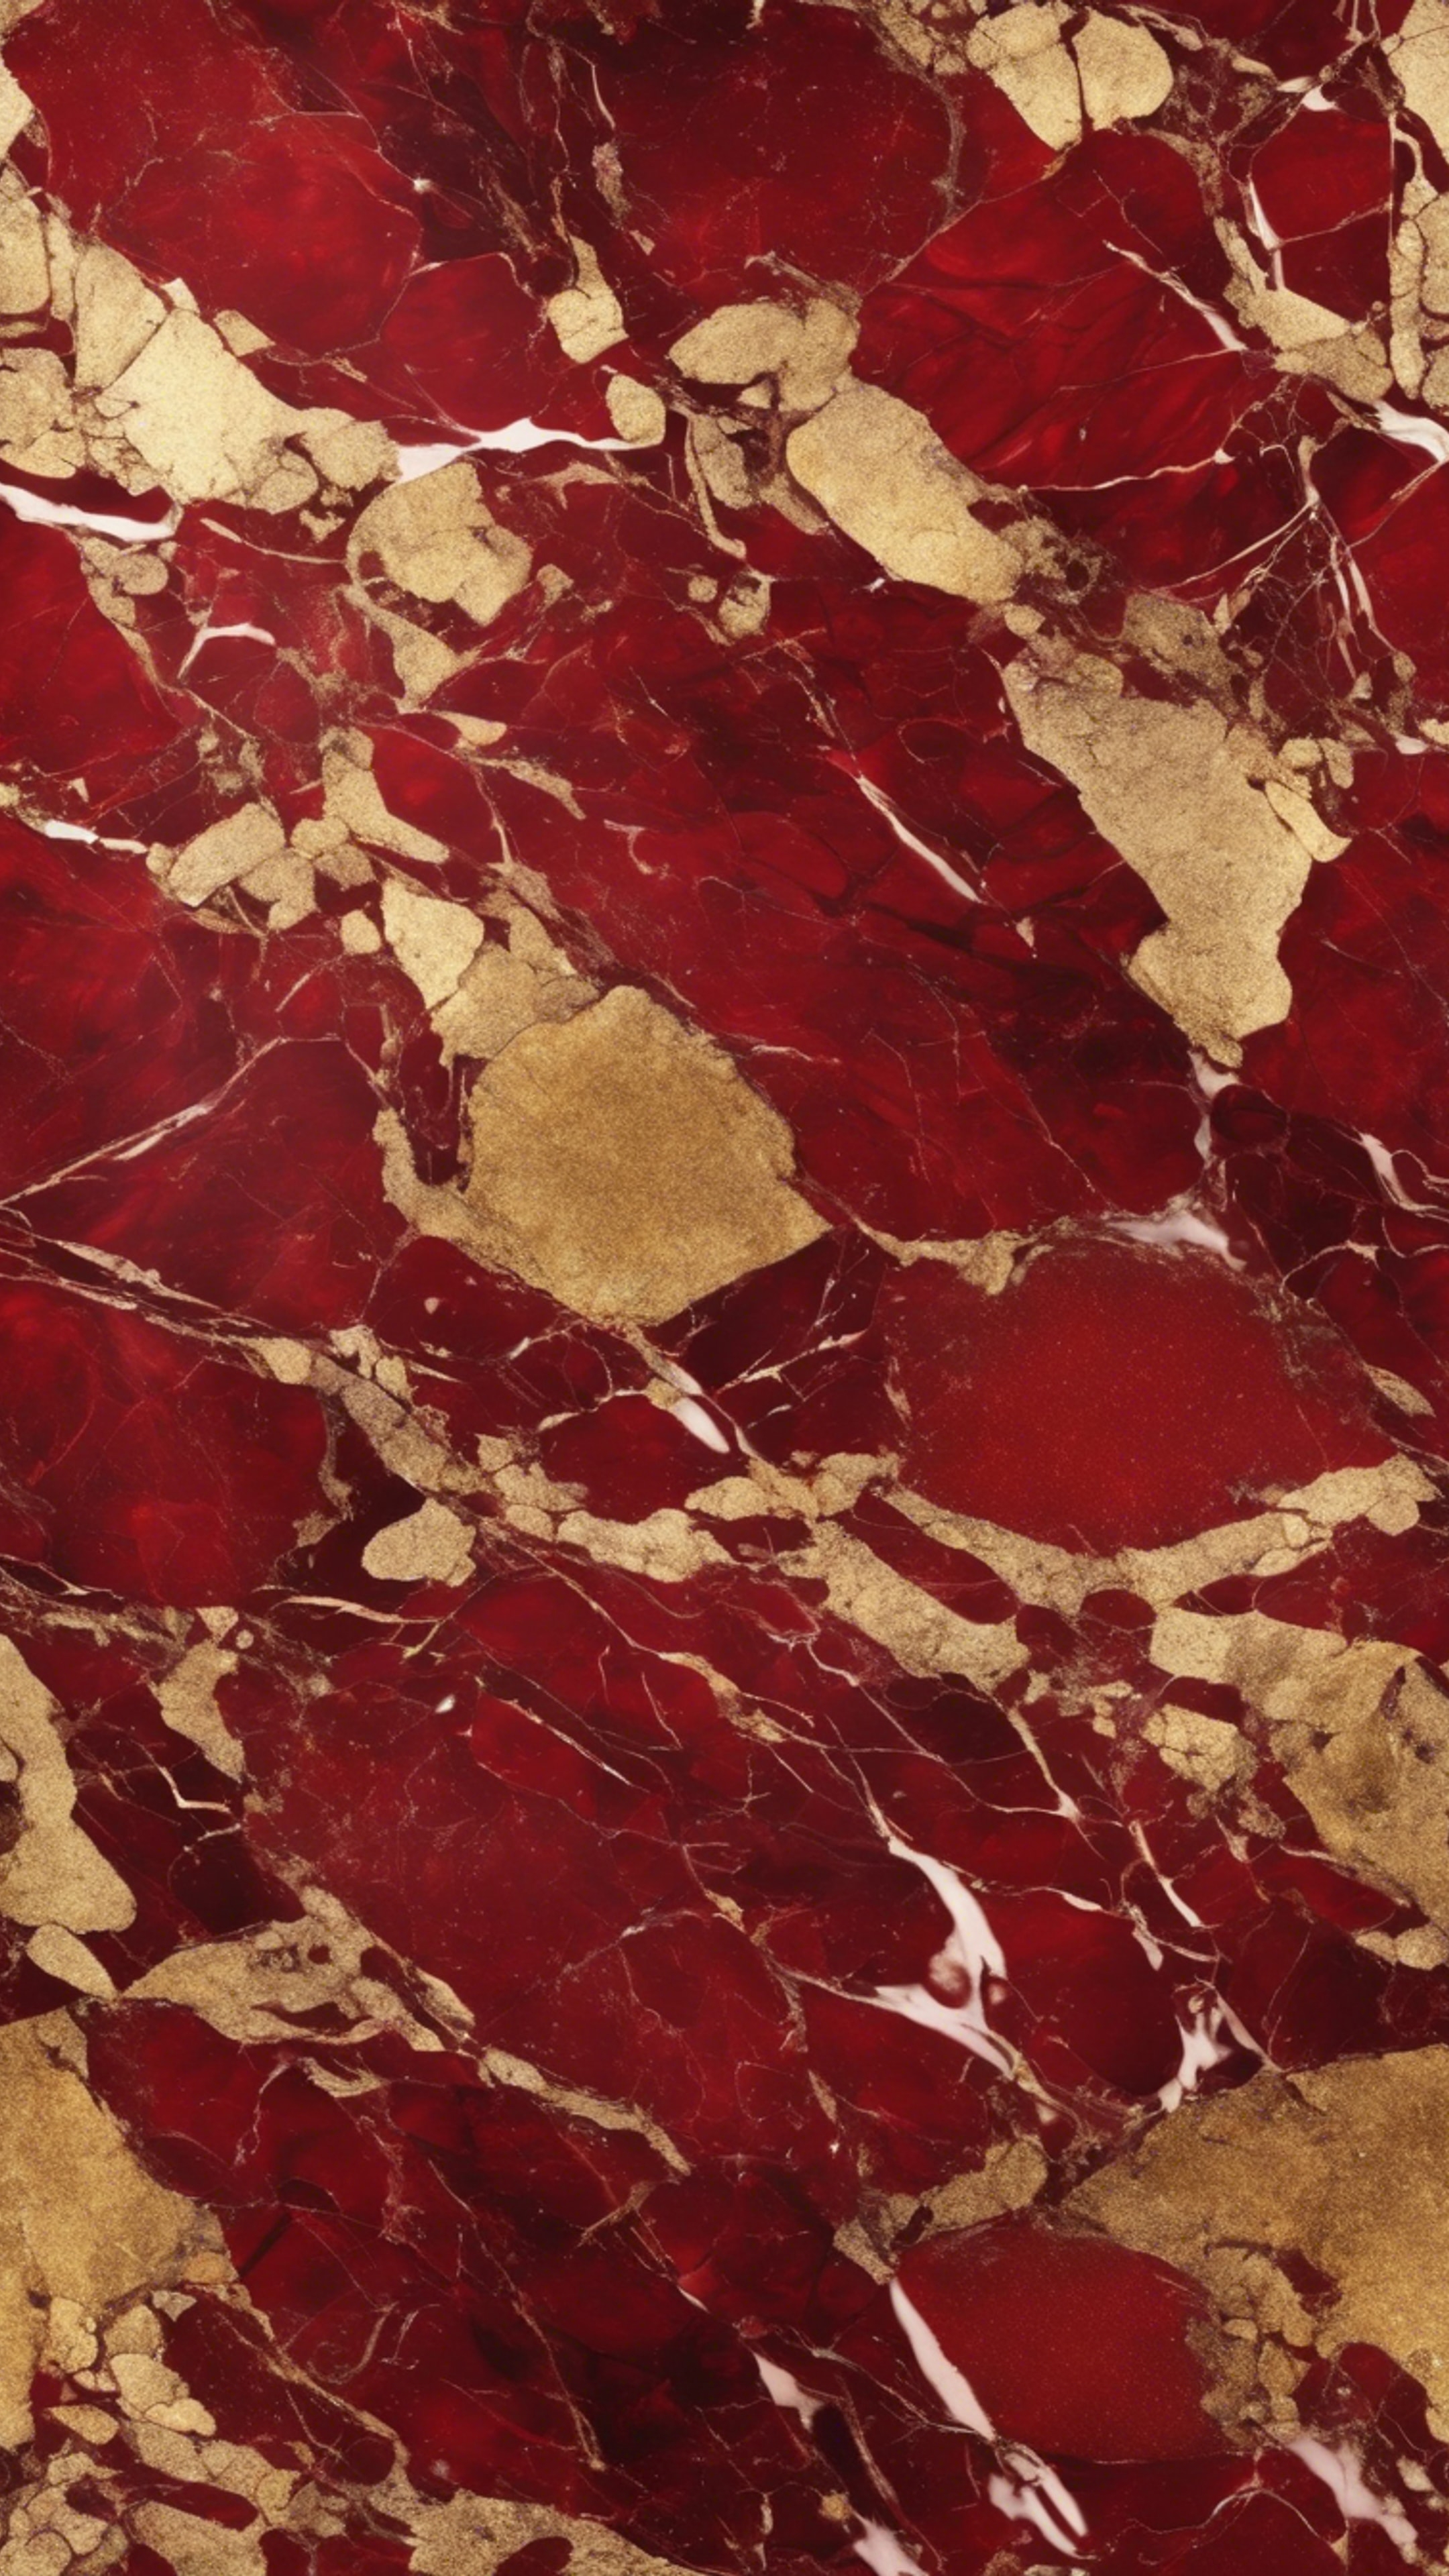 A play of rich red and shiny gold in a seamless marble pattern. Kertas dinding[c352f9871c3046a1a297]